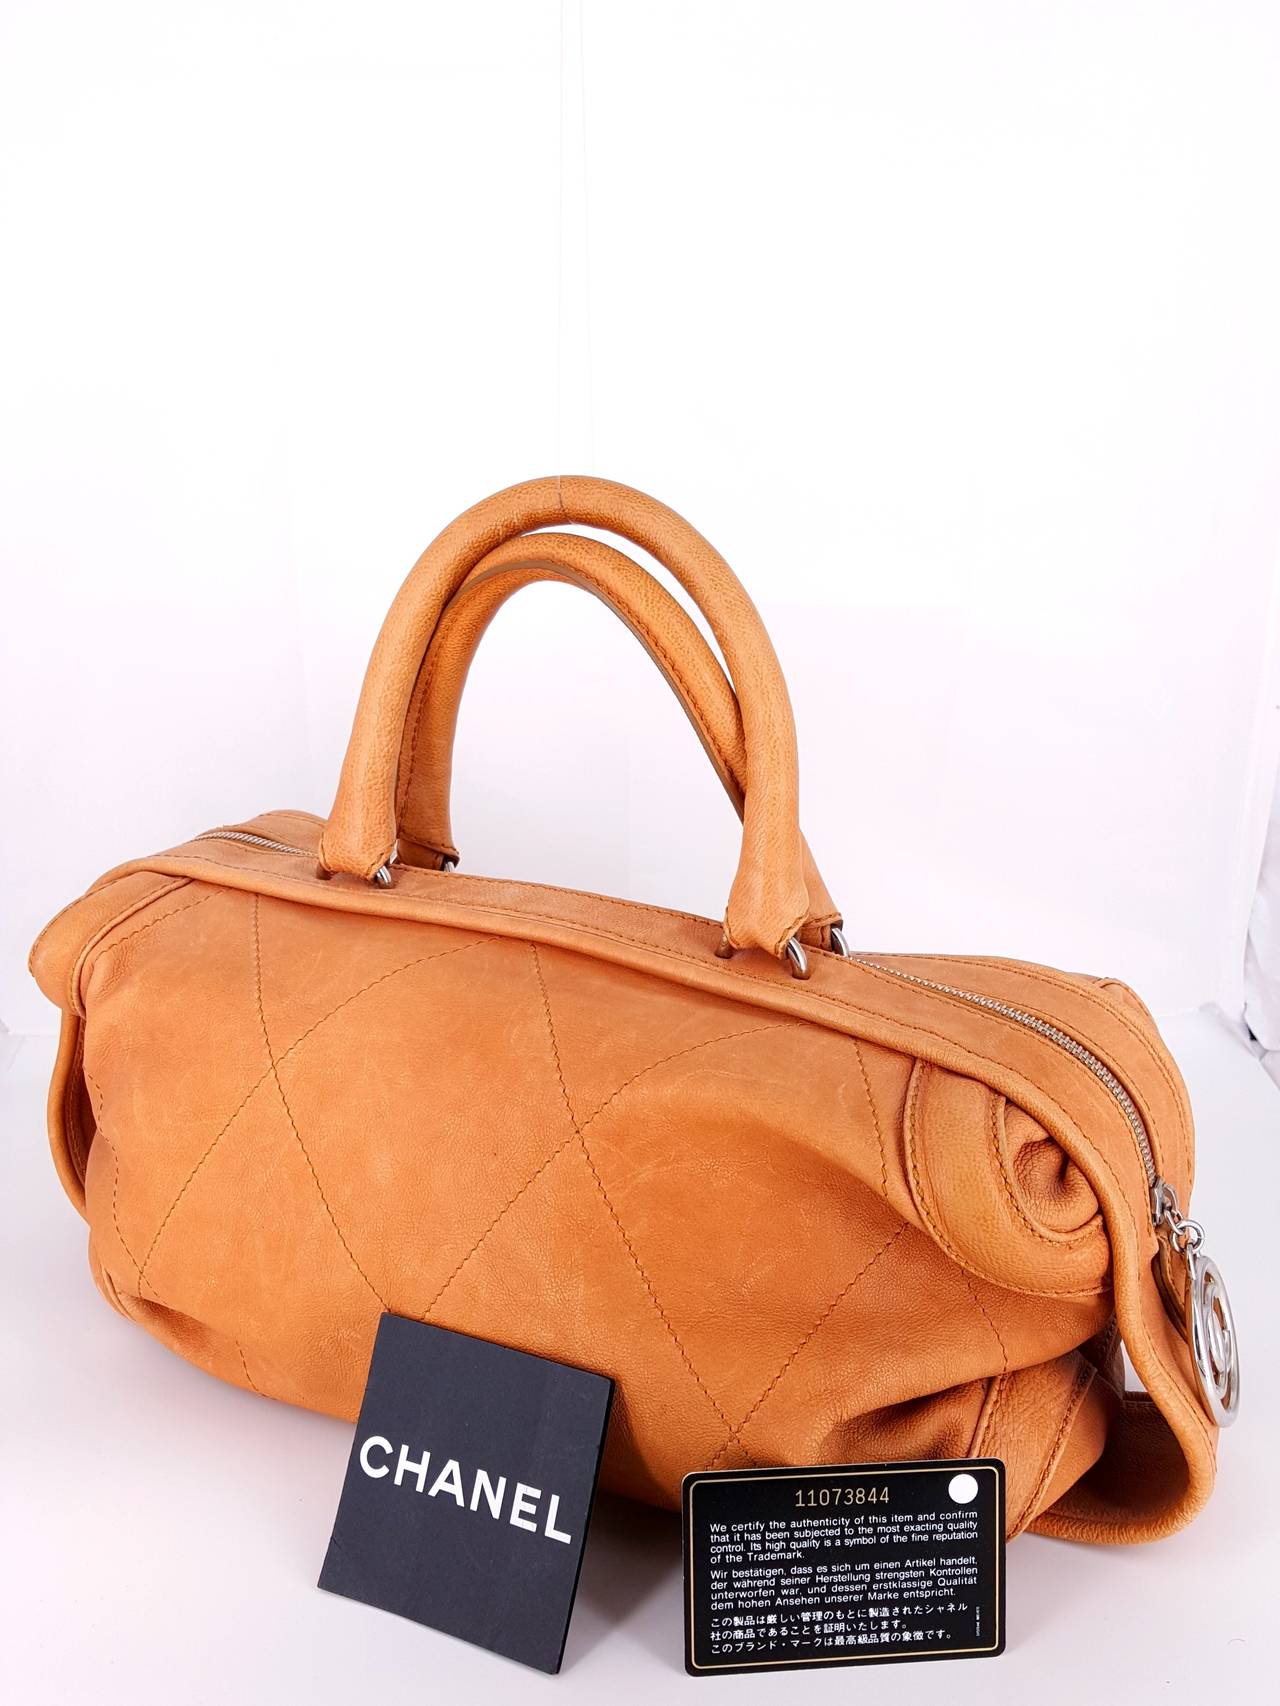 CHANEL Satchel In Salmon Distressed Leather With Silver Hardware For Sale 3